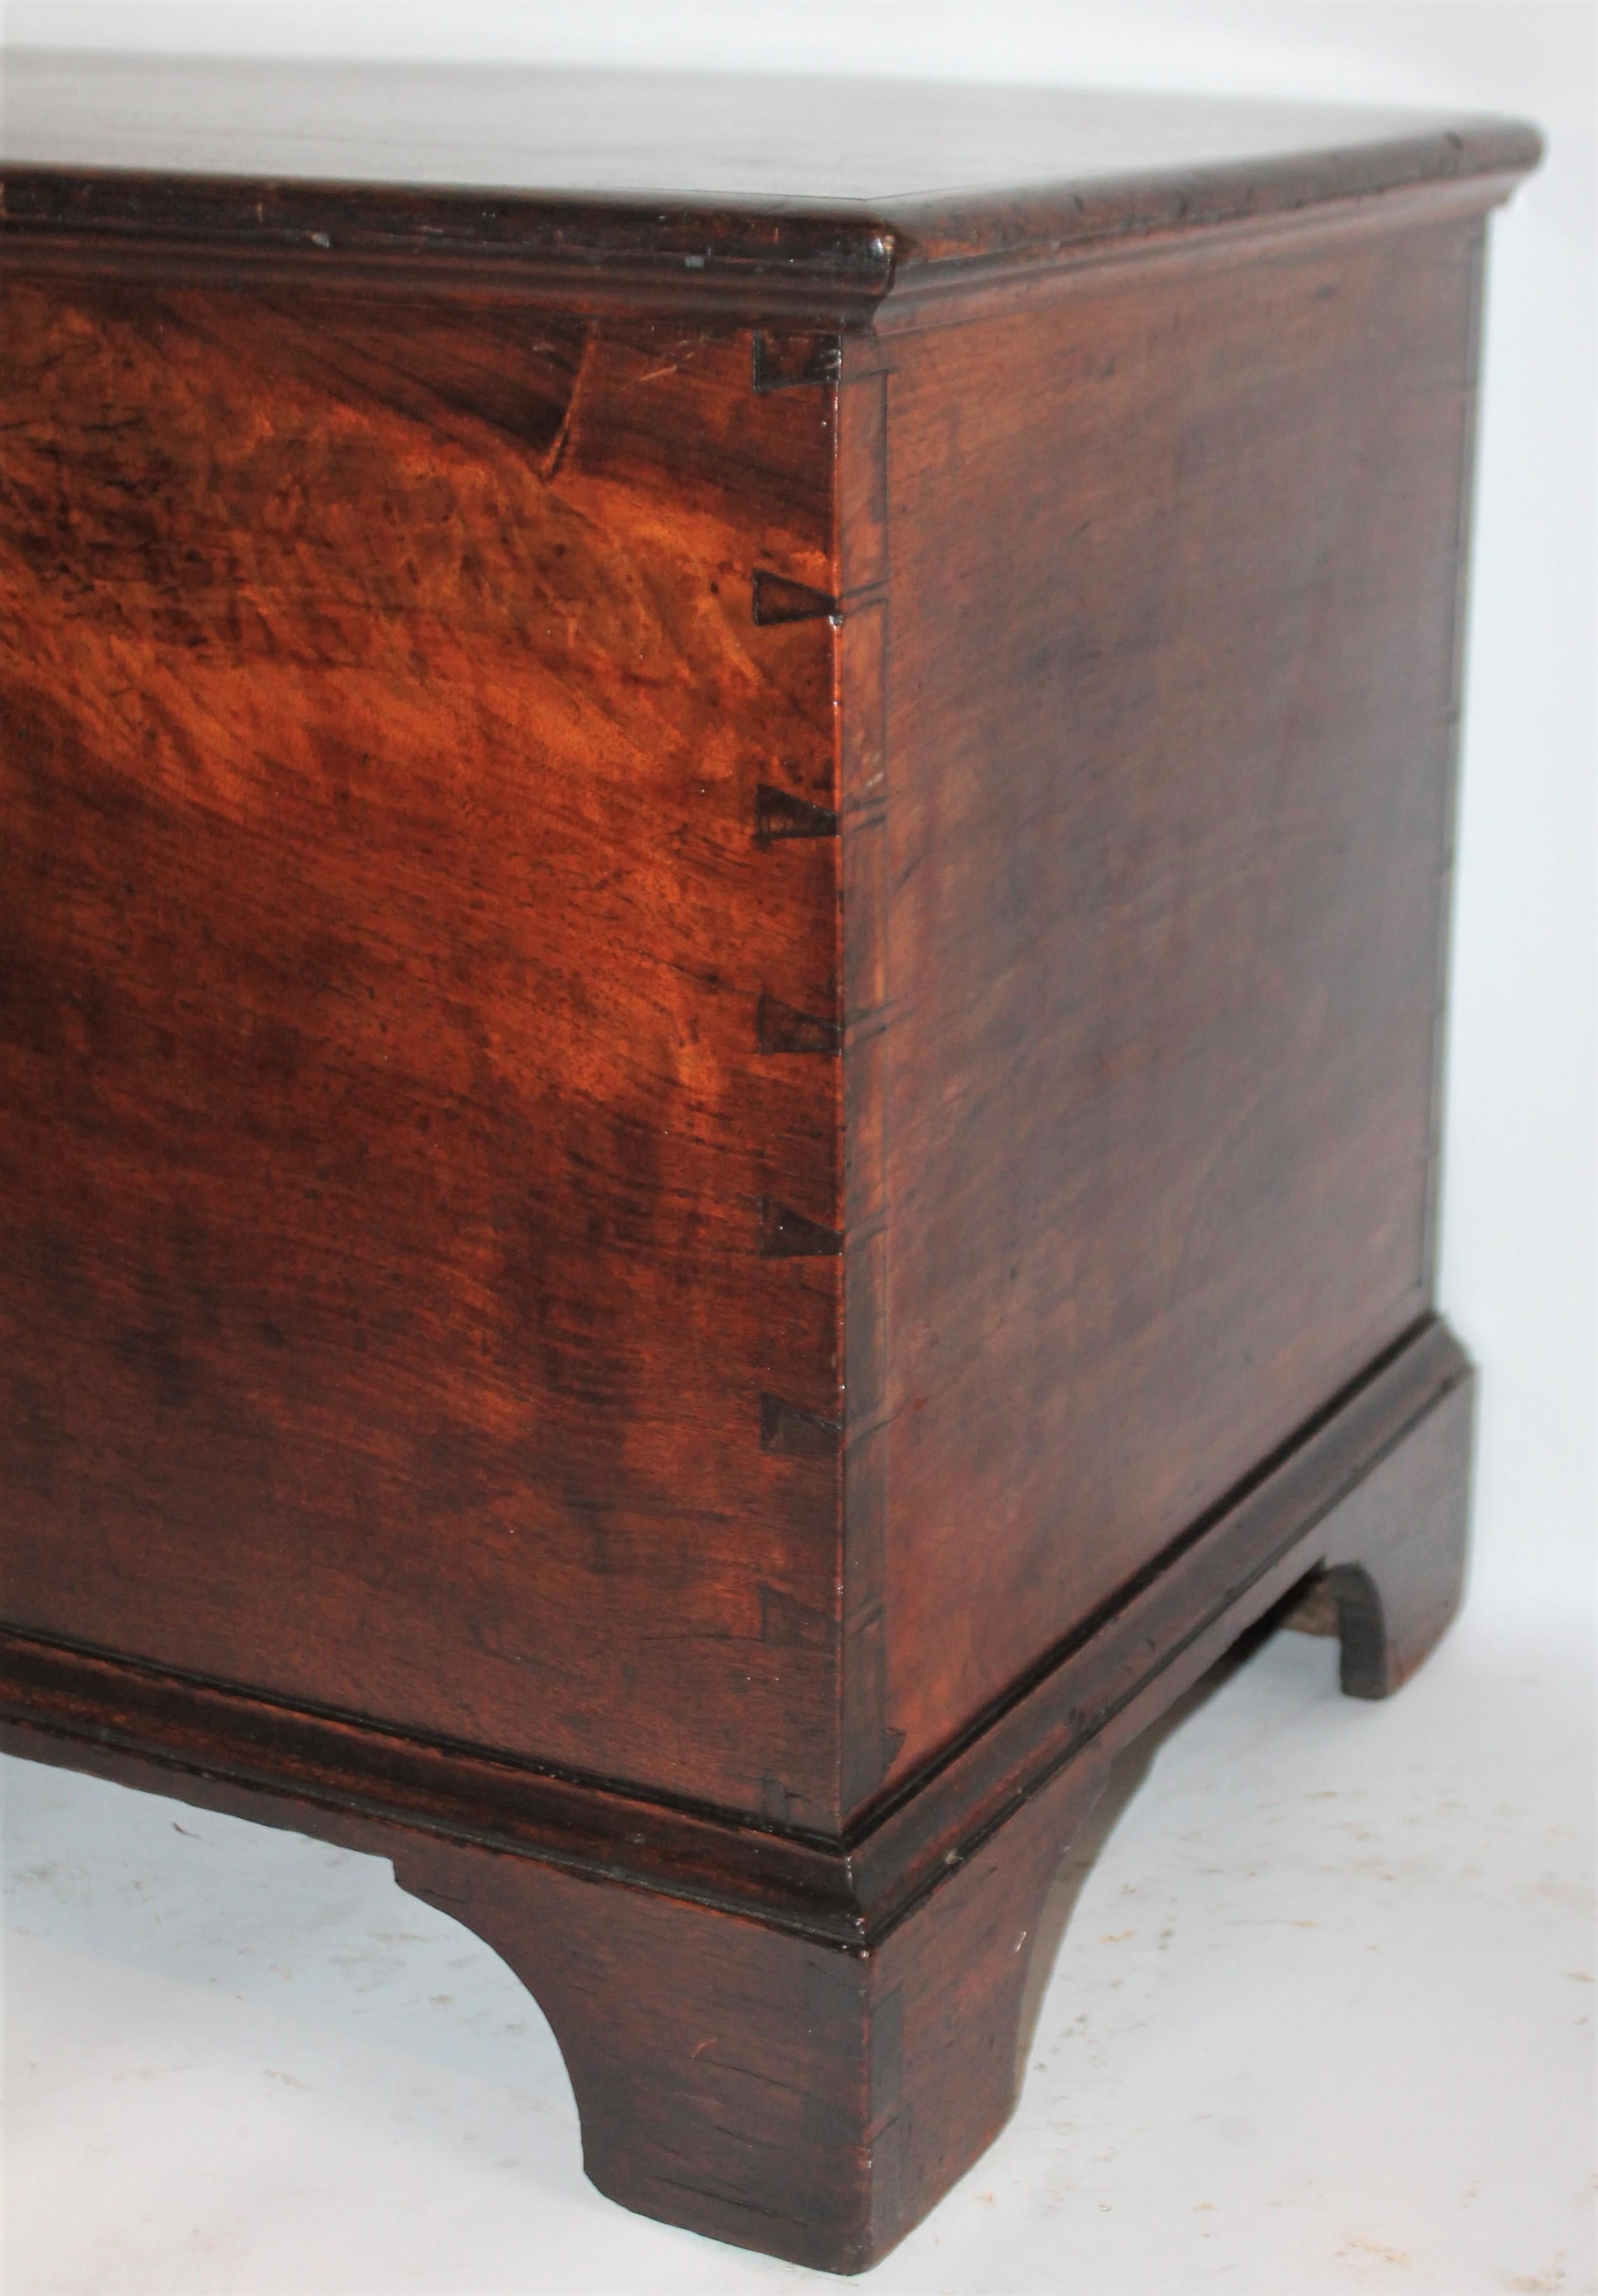 Hand-Crafted 19th Century Blanket Chest in Walnut from Pennsylvania